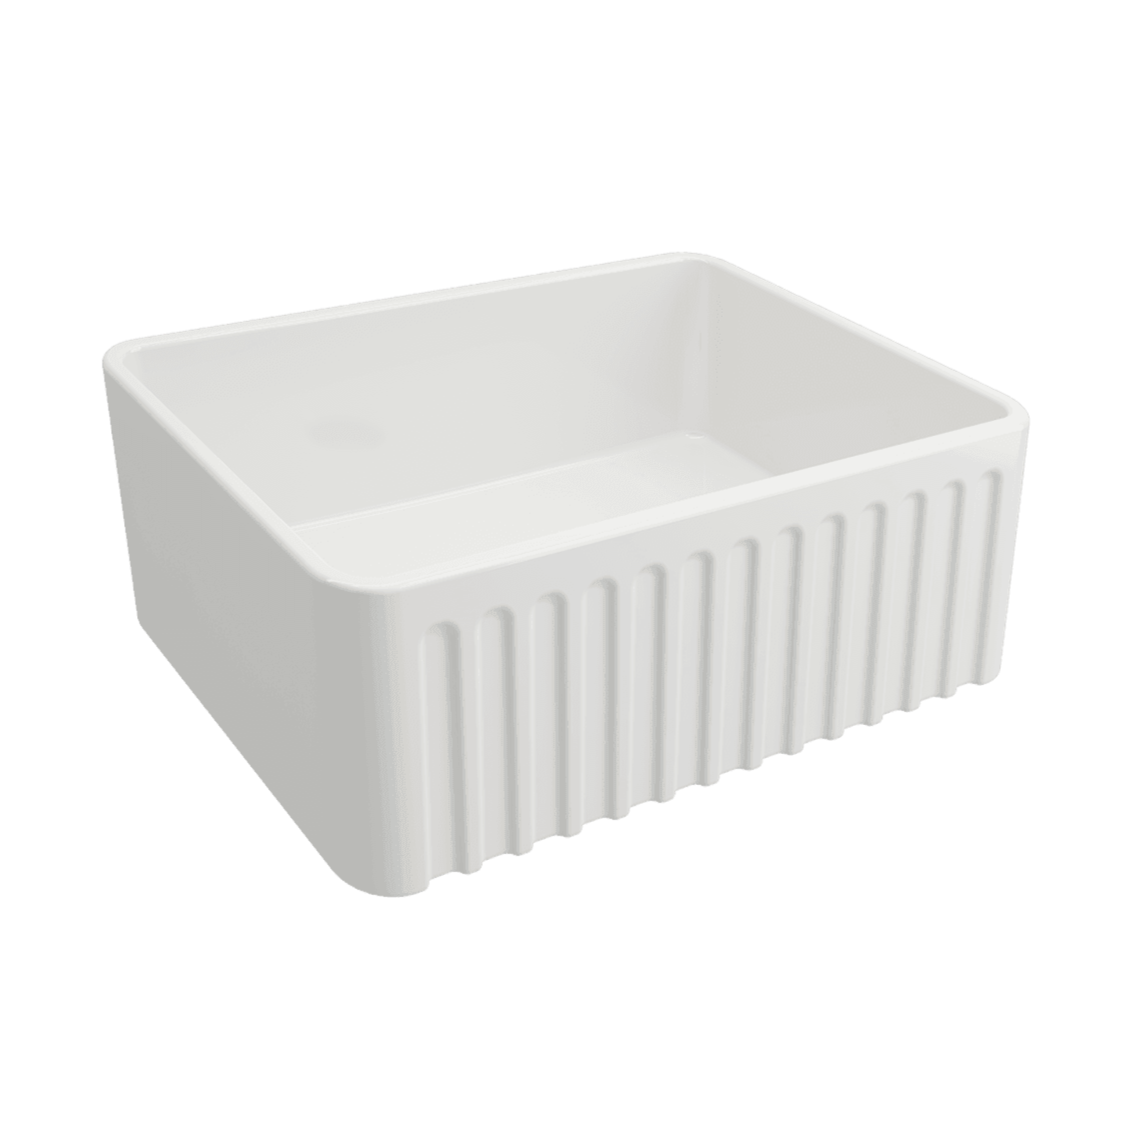 TURNER HASTINGS NOVI RIBBED FARMHOUSE BUTLER SINK WITH OVERFLOW GLOSS WHITE 600MM